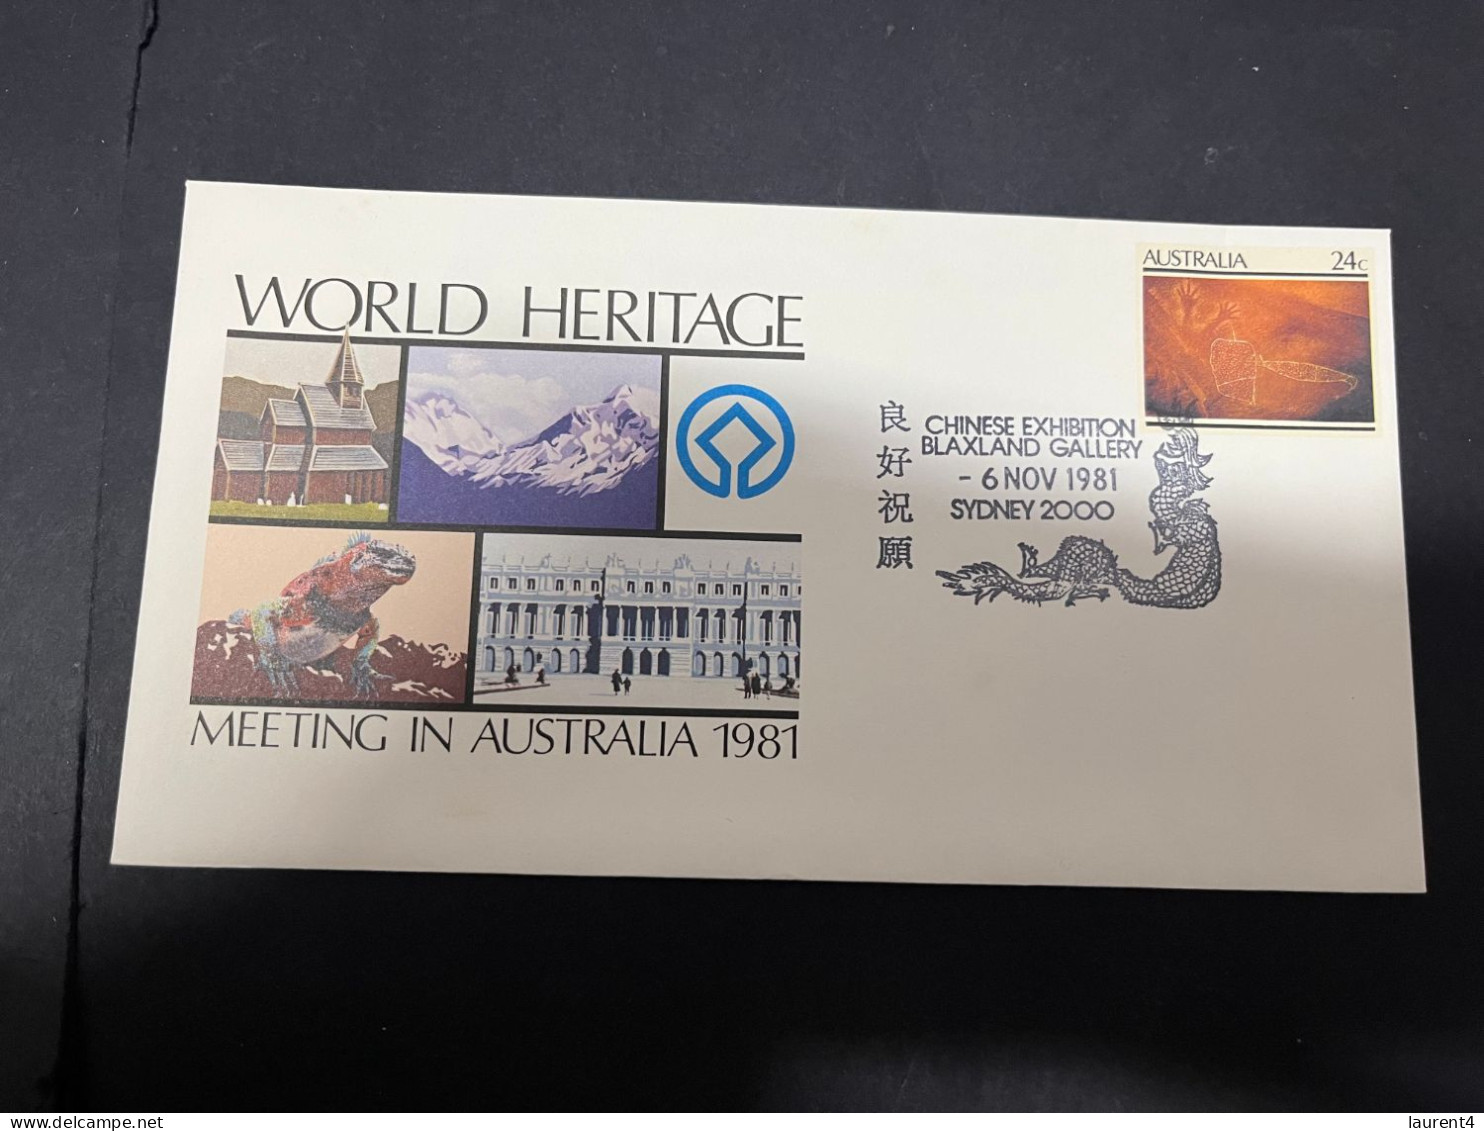 26-4-2024 (3 Z 9) Australia FDC - 1981 - Chinese Exhibition Blaxland Gallery In Sydney (2 Special P/m) 2nd & 6th Nov - Premiers Jours (FDC)